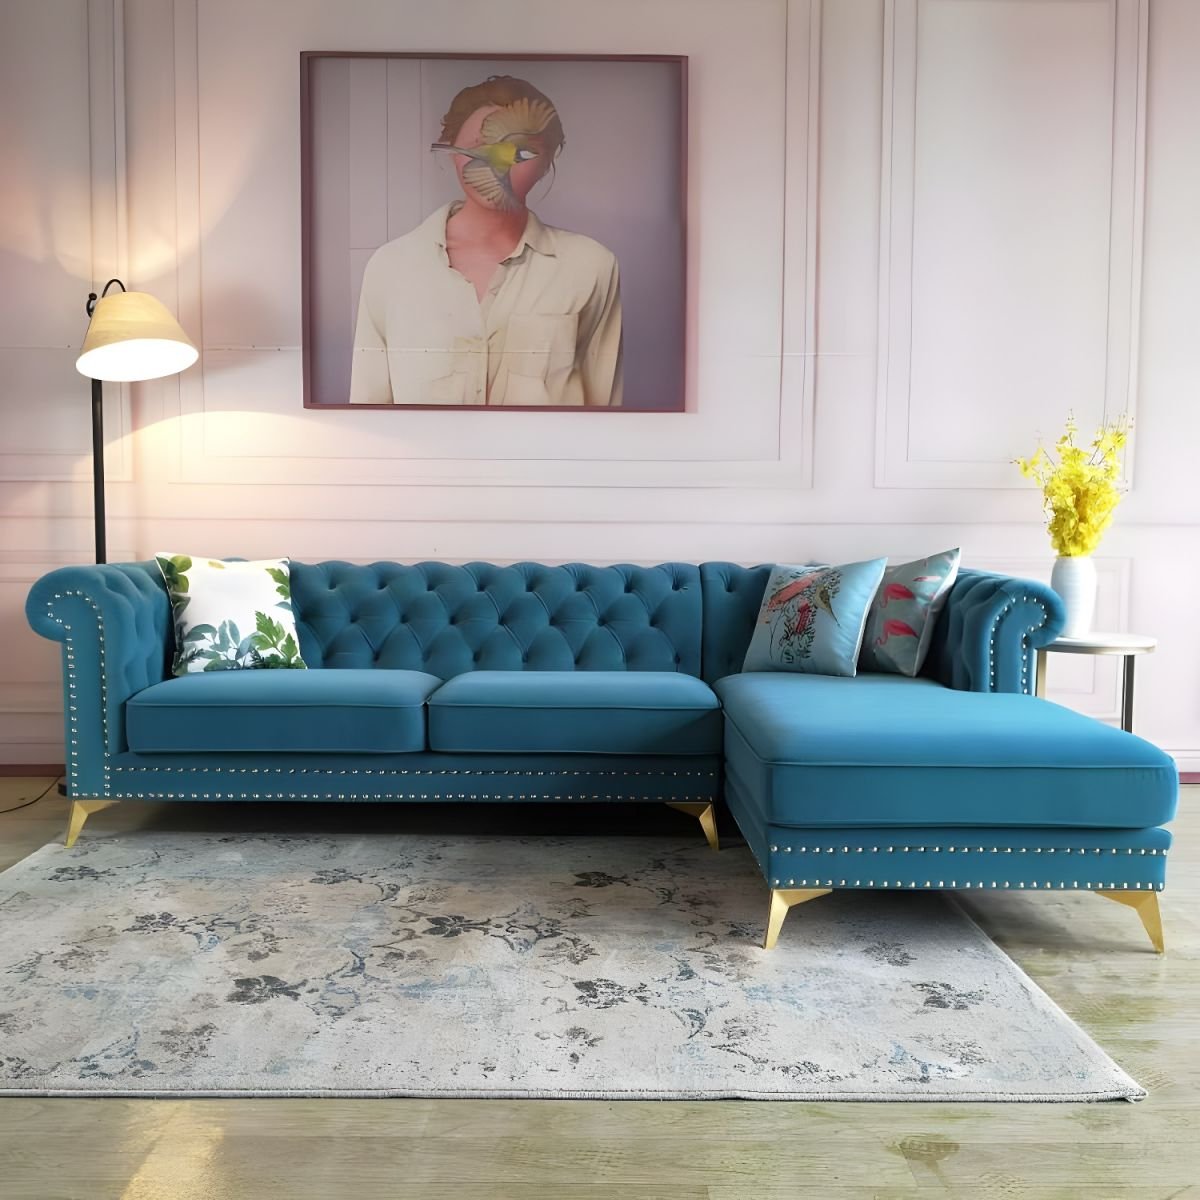 Glamorous Tufted L-Shape Sectional Sofa with Round Arm and Nailhead Trim - Peacock Blue Flannel Right